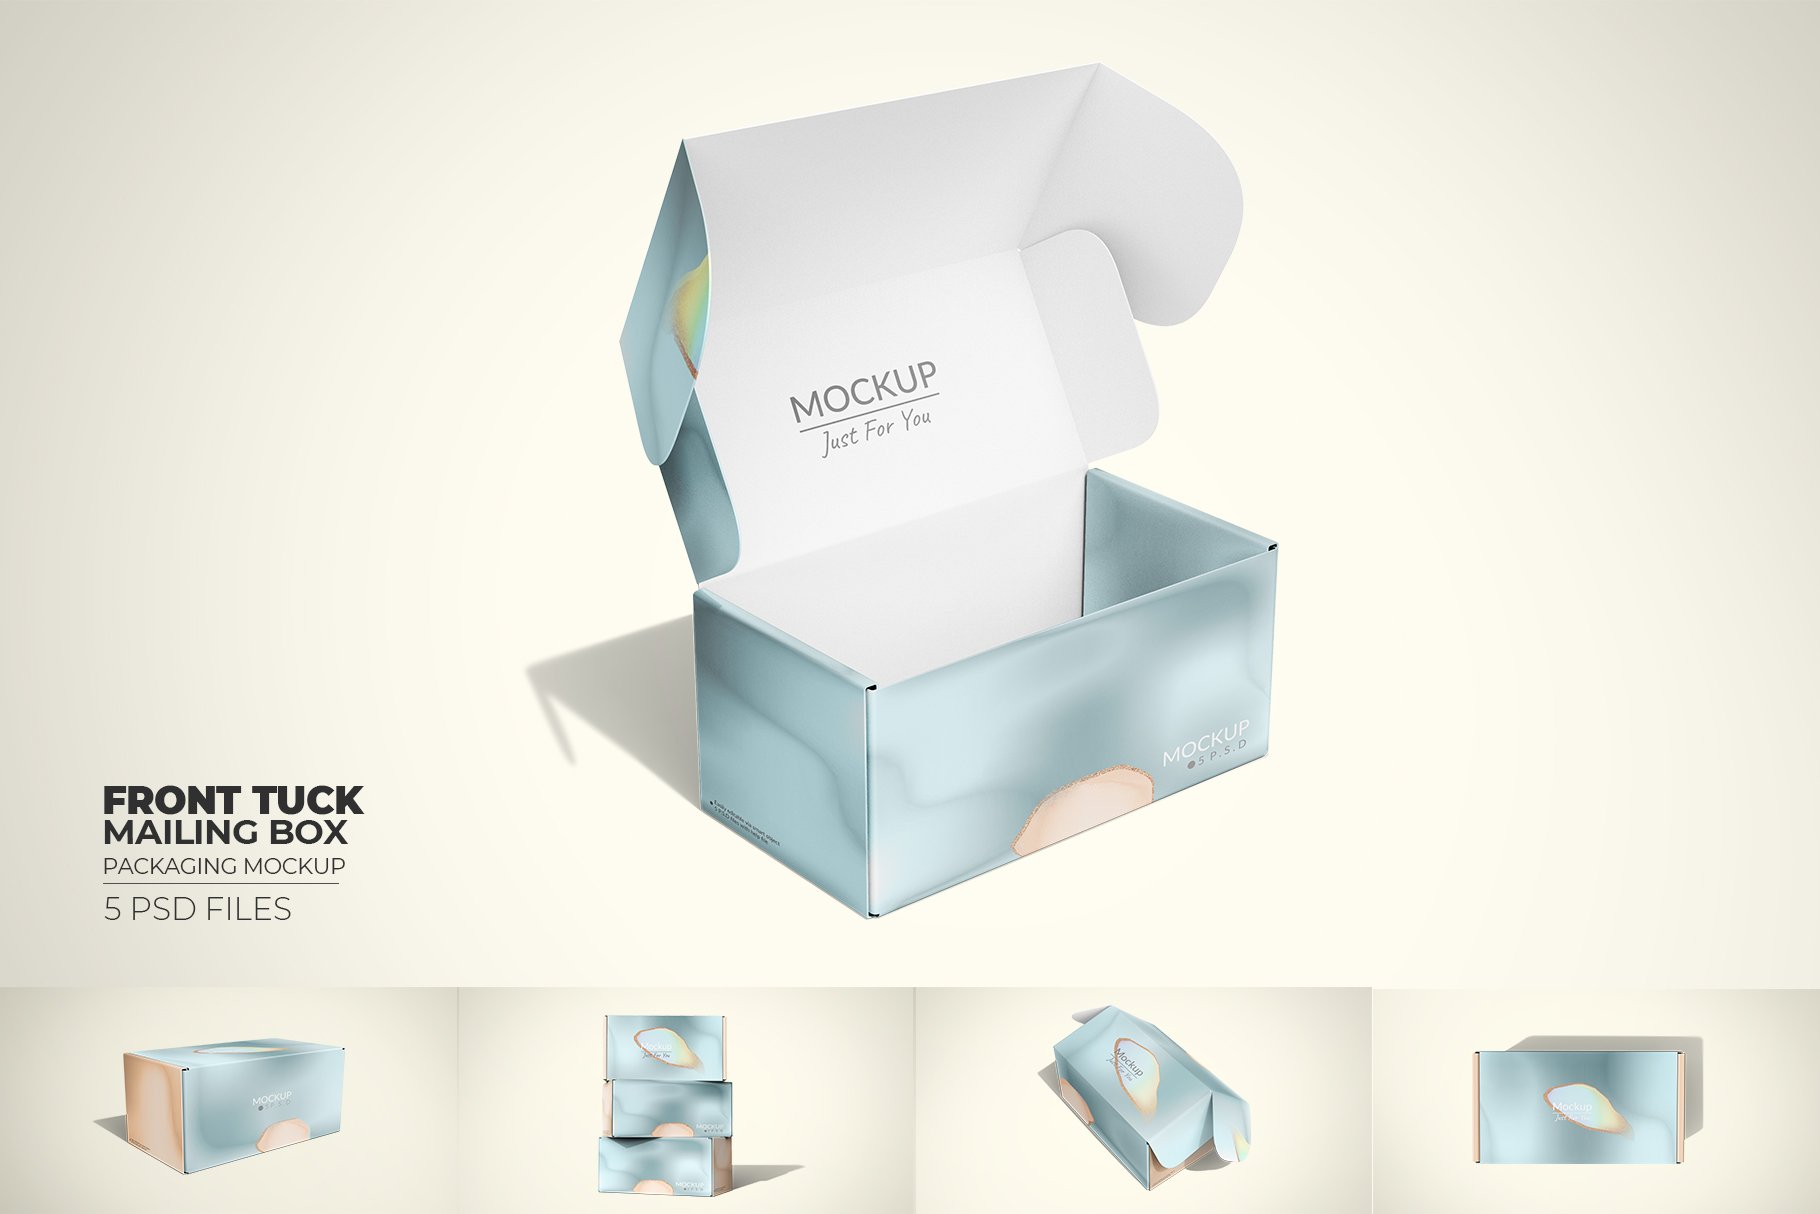 Front Tuck Mailing Box Mockup cover image.